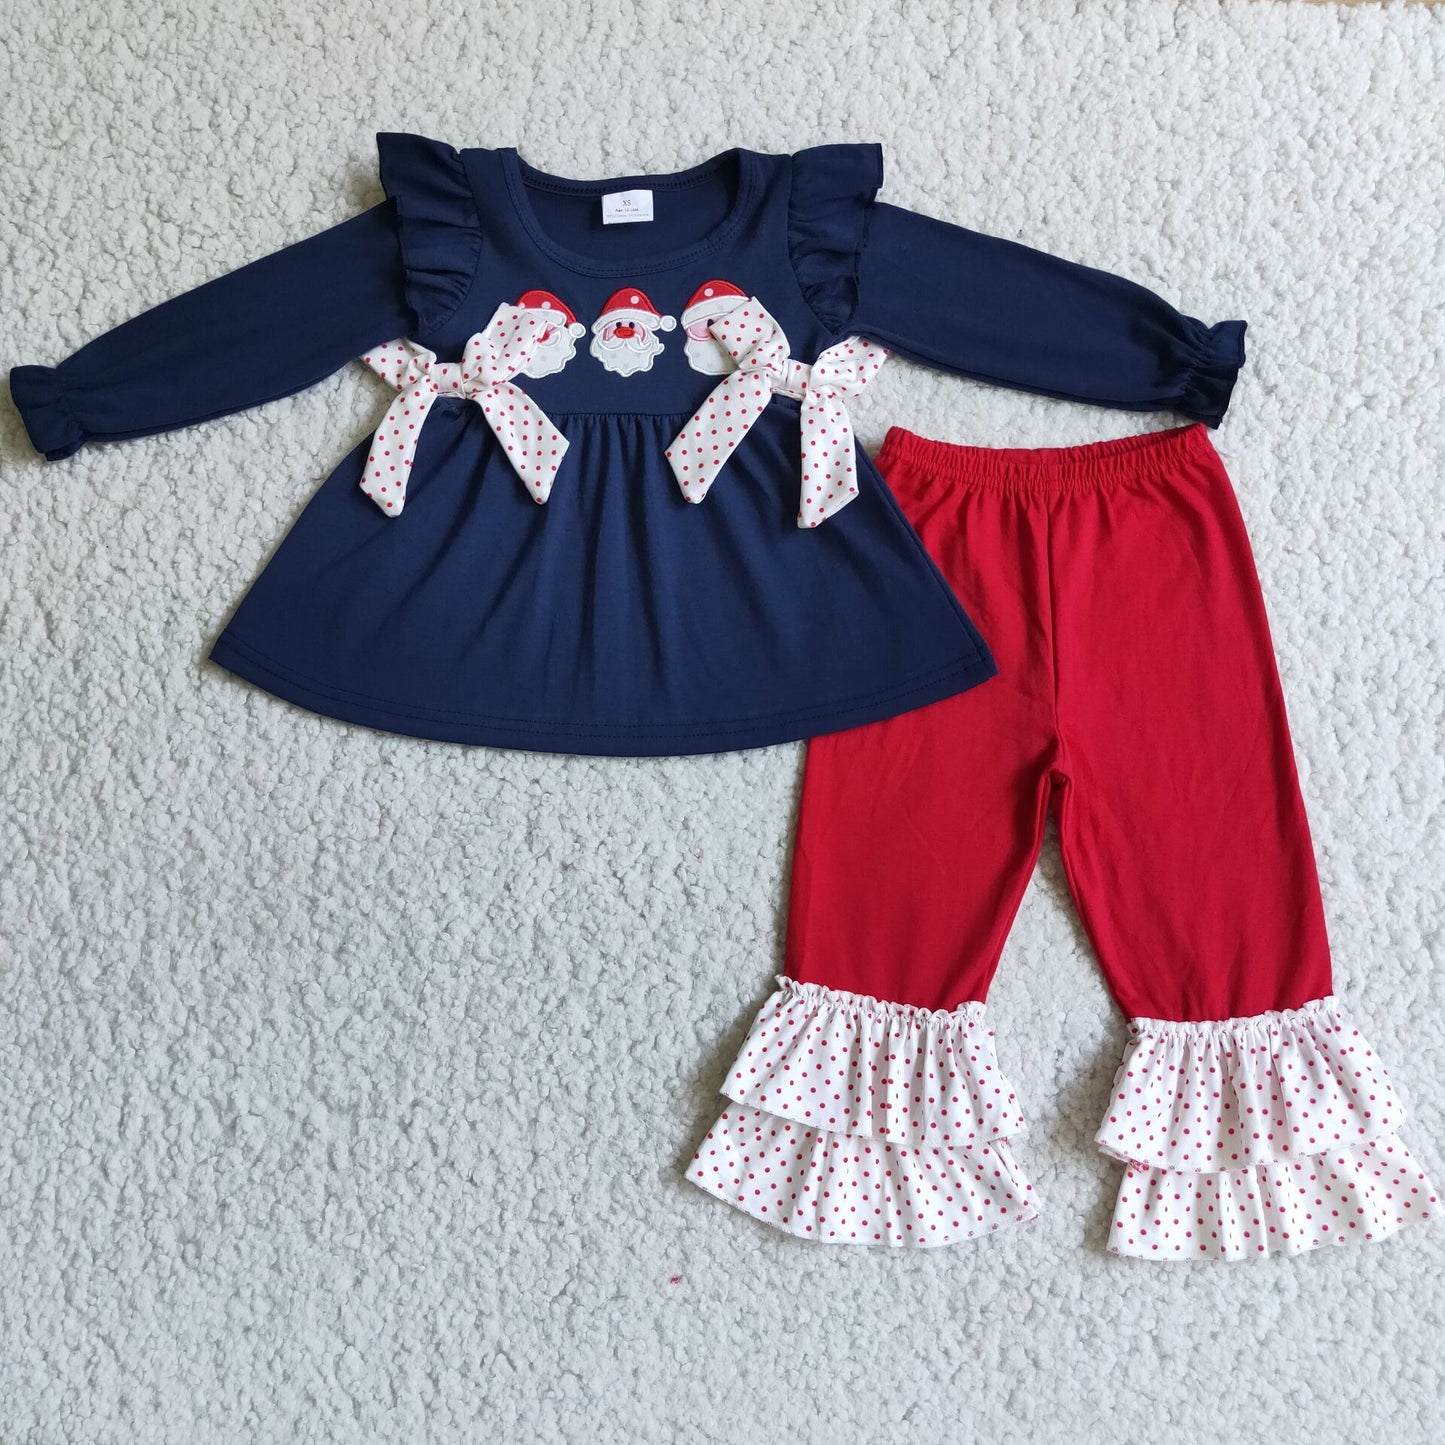 Small Santa Embroidery Outfit with Bow for Christmas